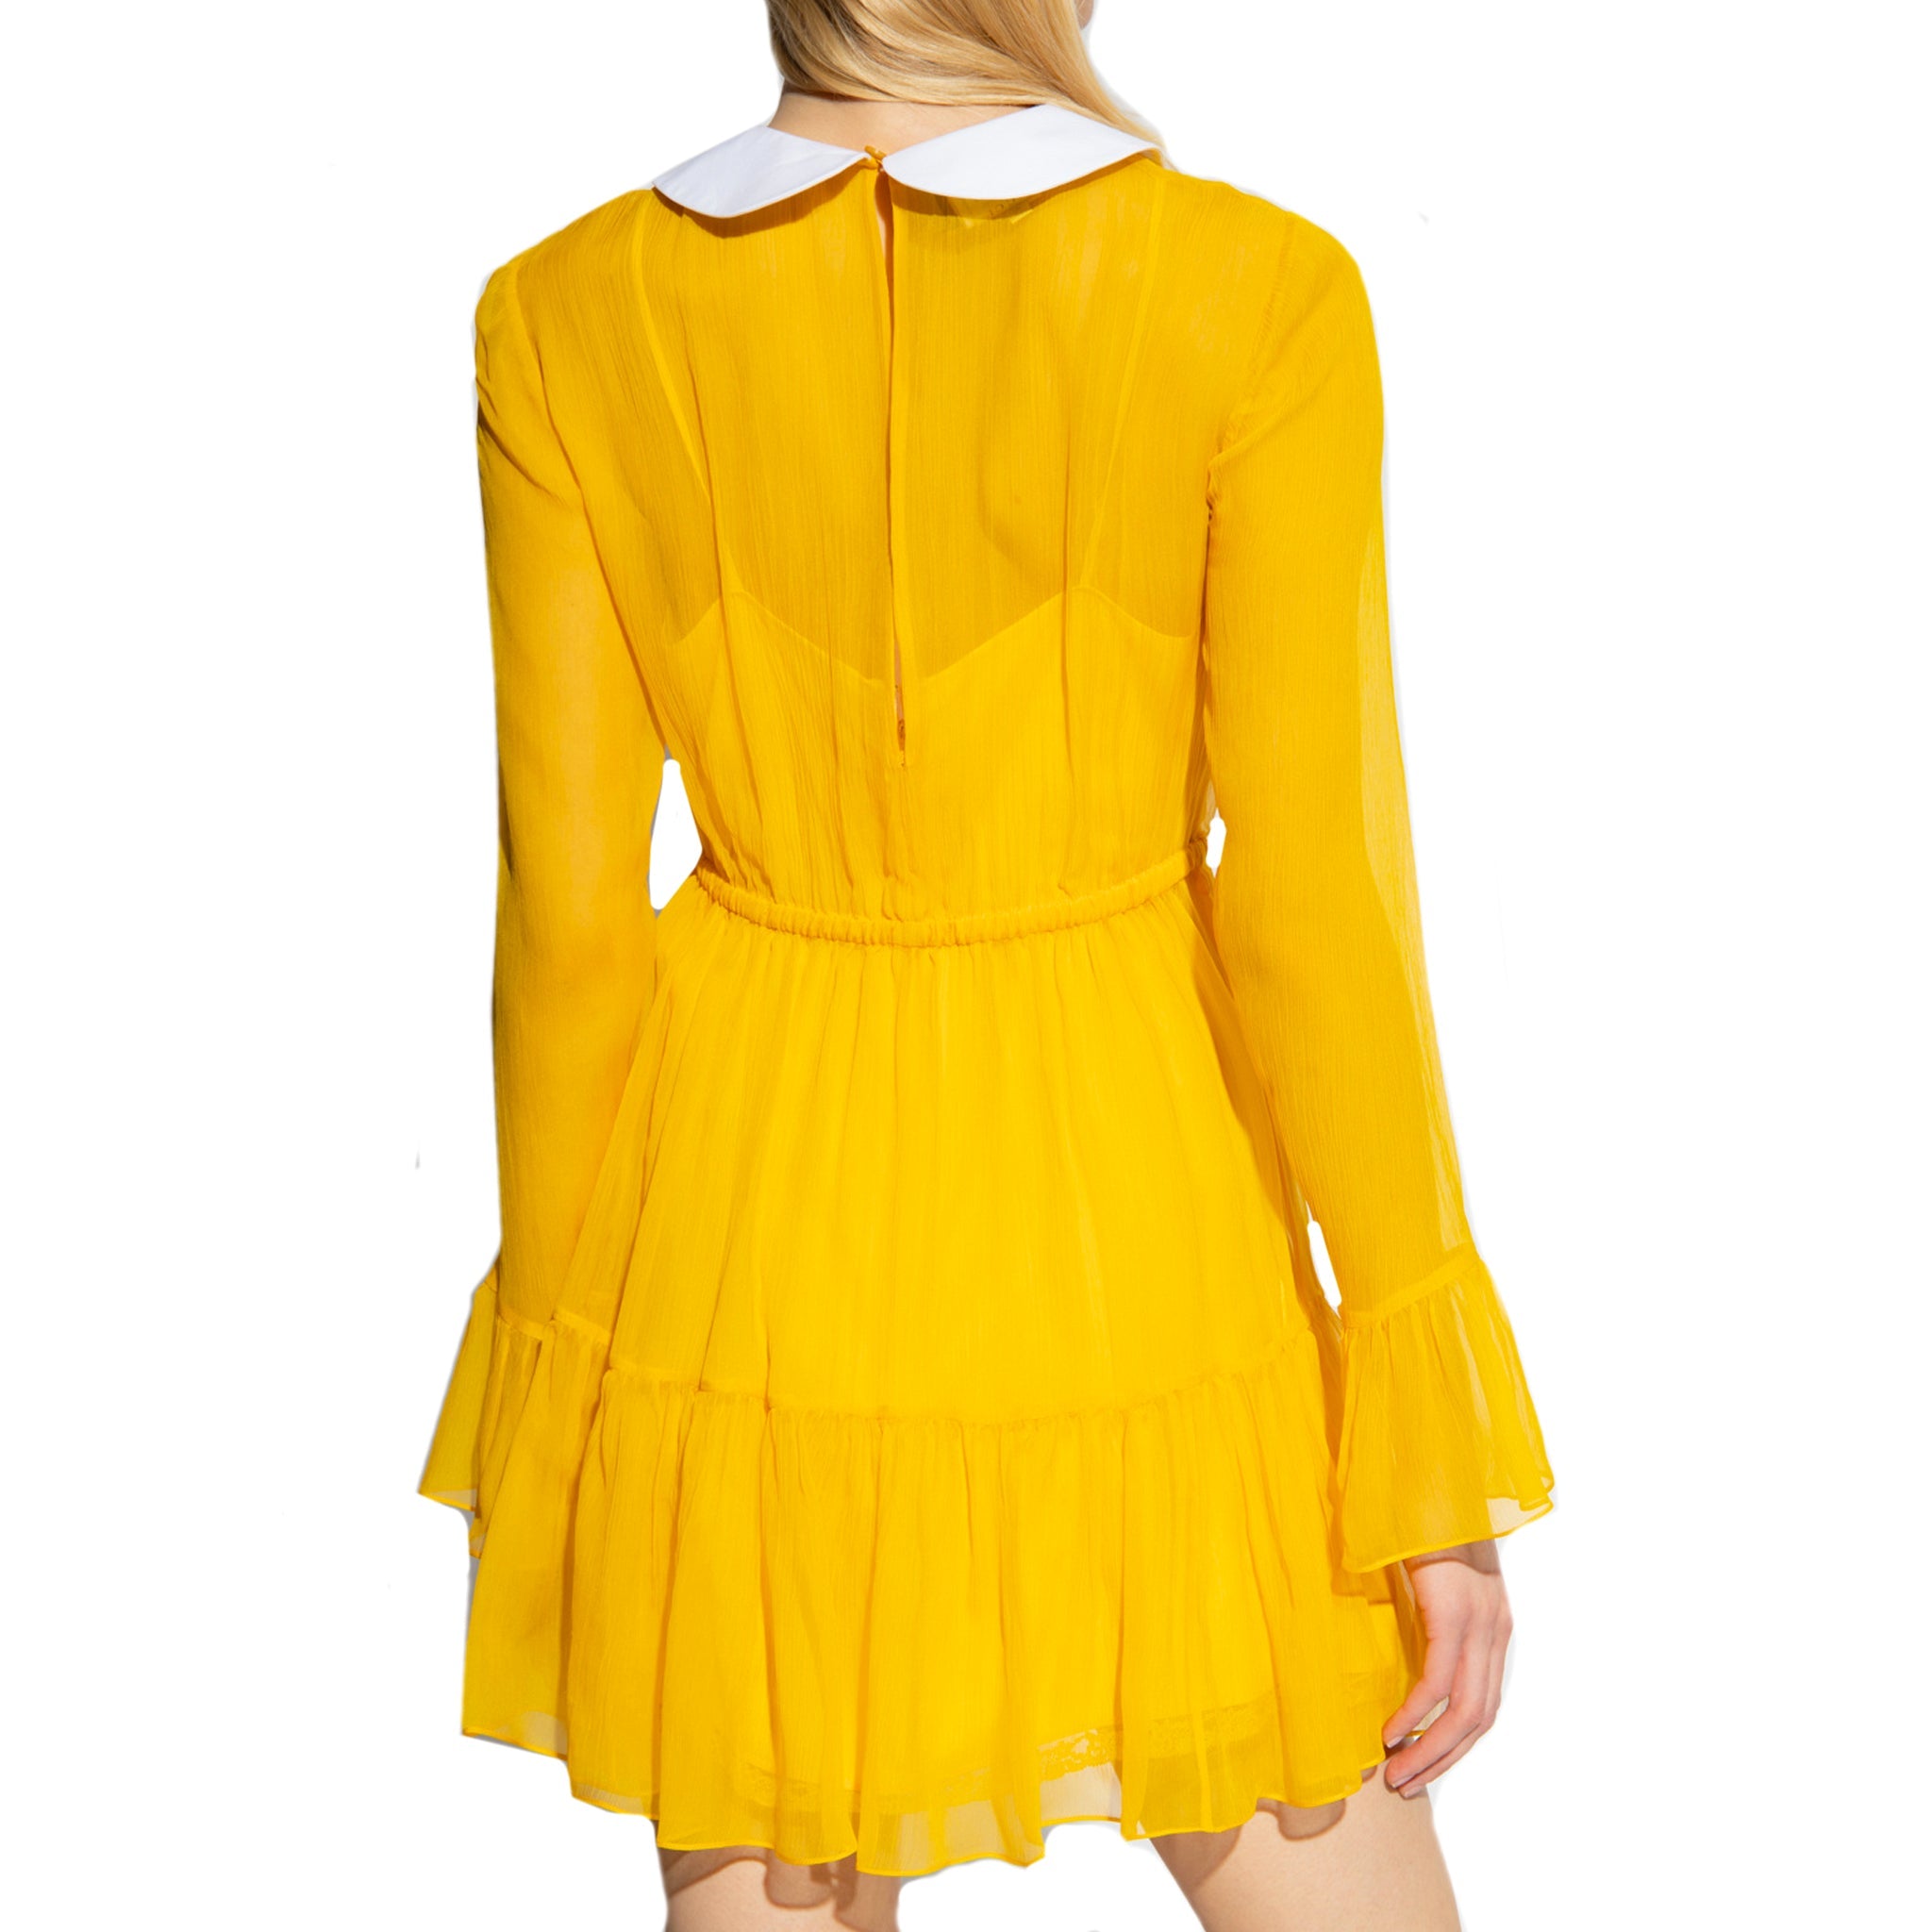 GUCCI-OUTLET-SALE-Gucci-Silk-Chiffon-Dress-WOMEN-CLOTHING-YELLOW-42-ARCHIVE-COLLECTION-3.jpg